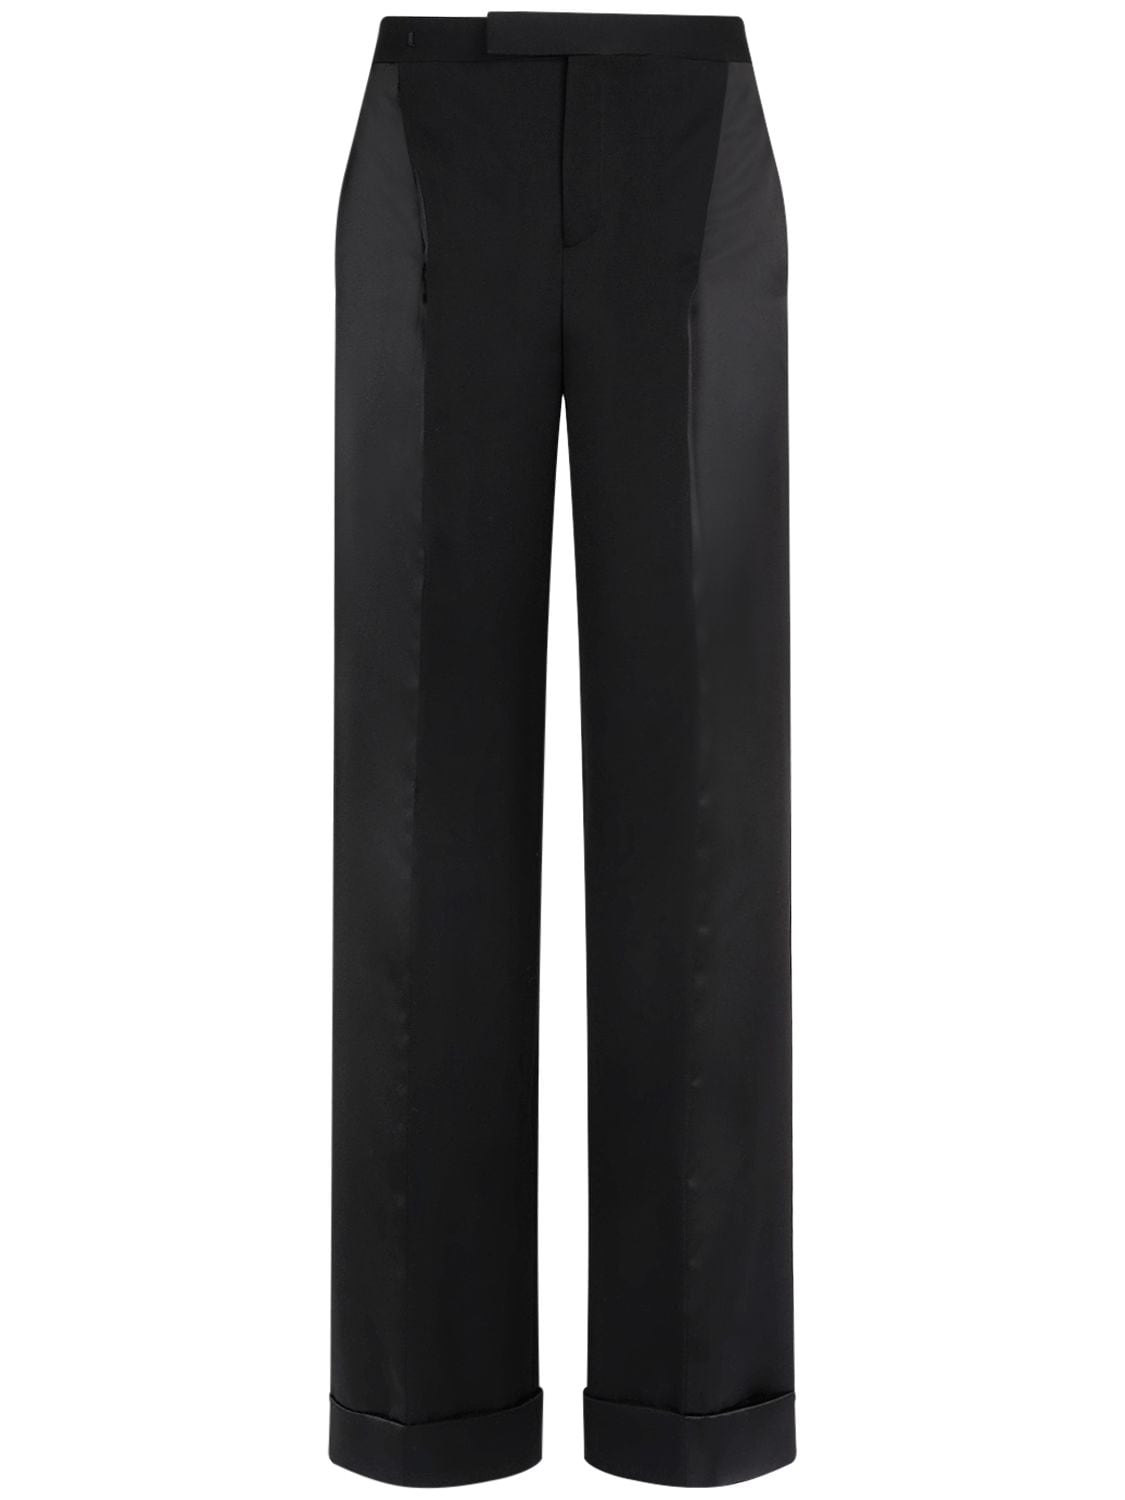 Image of Tux Wool Pants W/ Side Bands